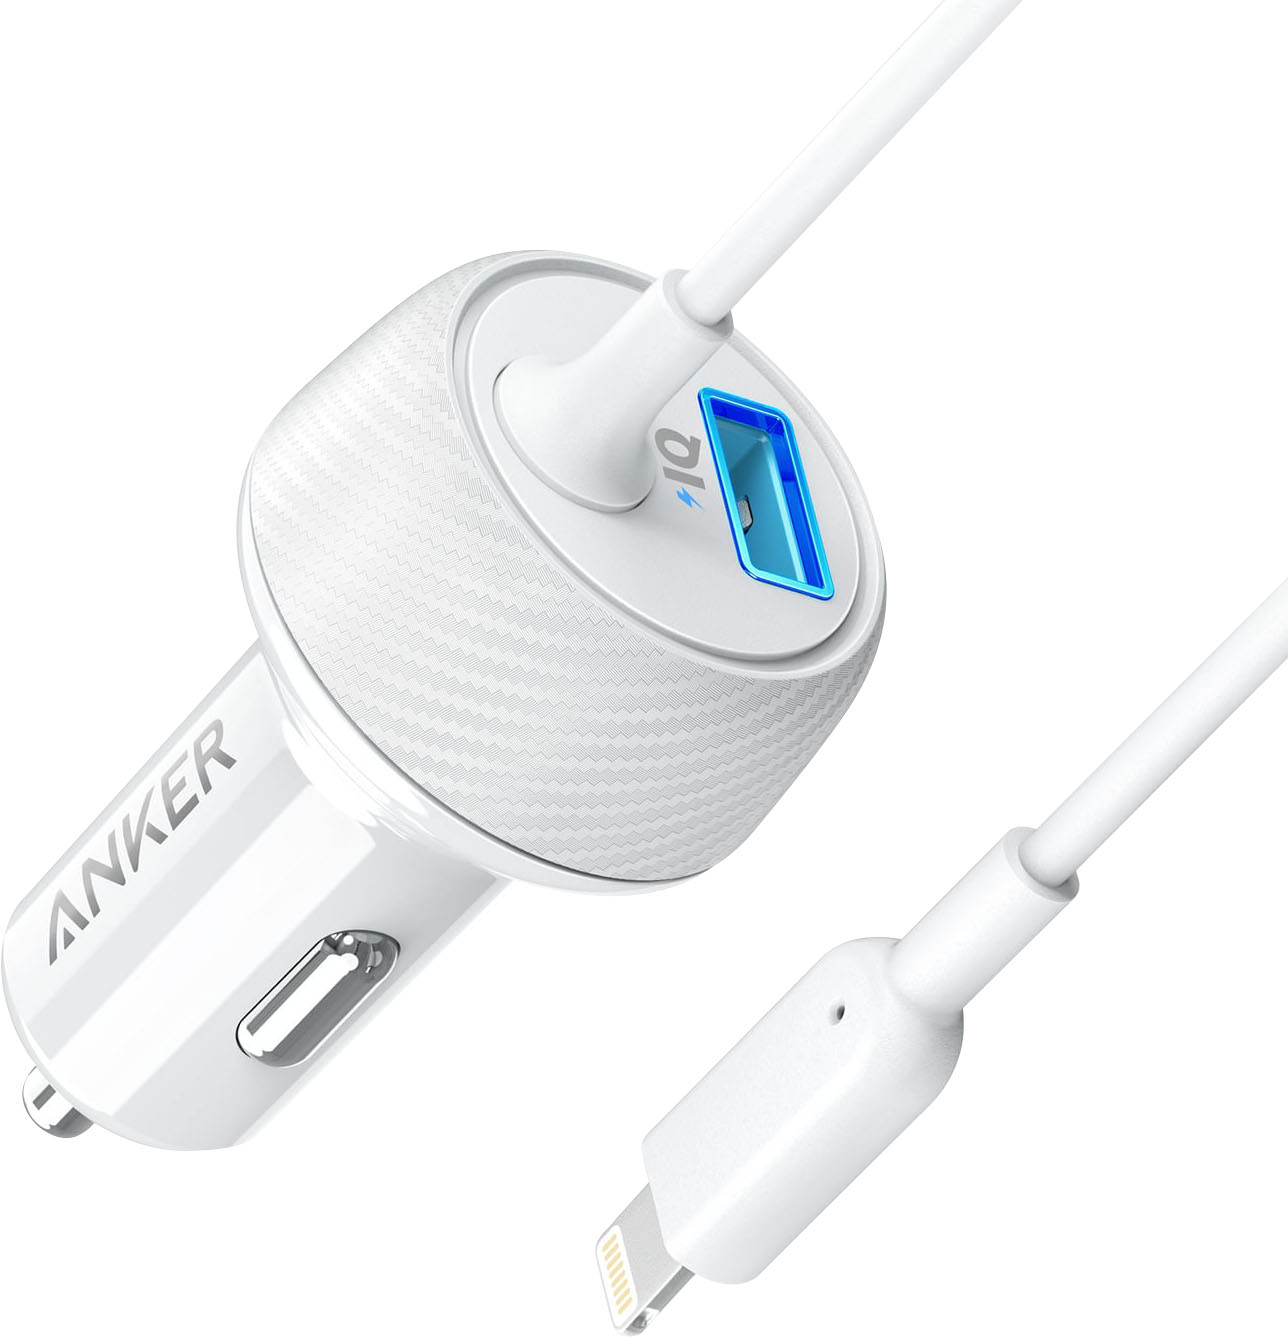 Anker PowerDrive 2 Elite 24W Vehicle Charger with Lightening Connector  White A2214H21-1 - Best Buy